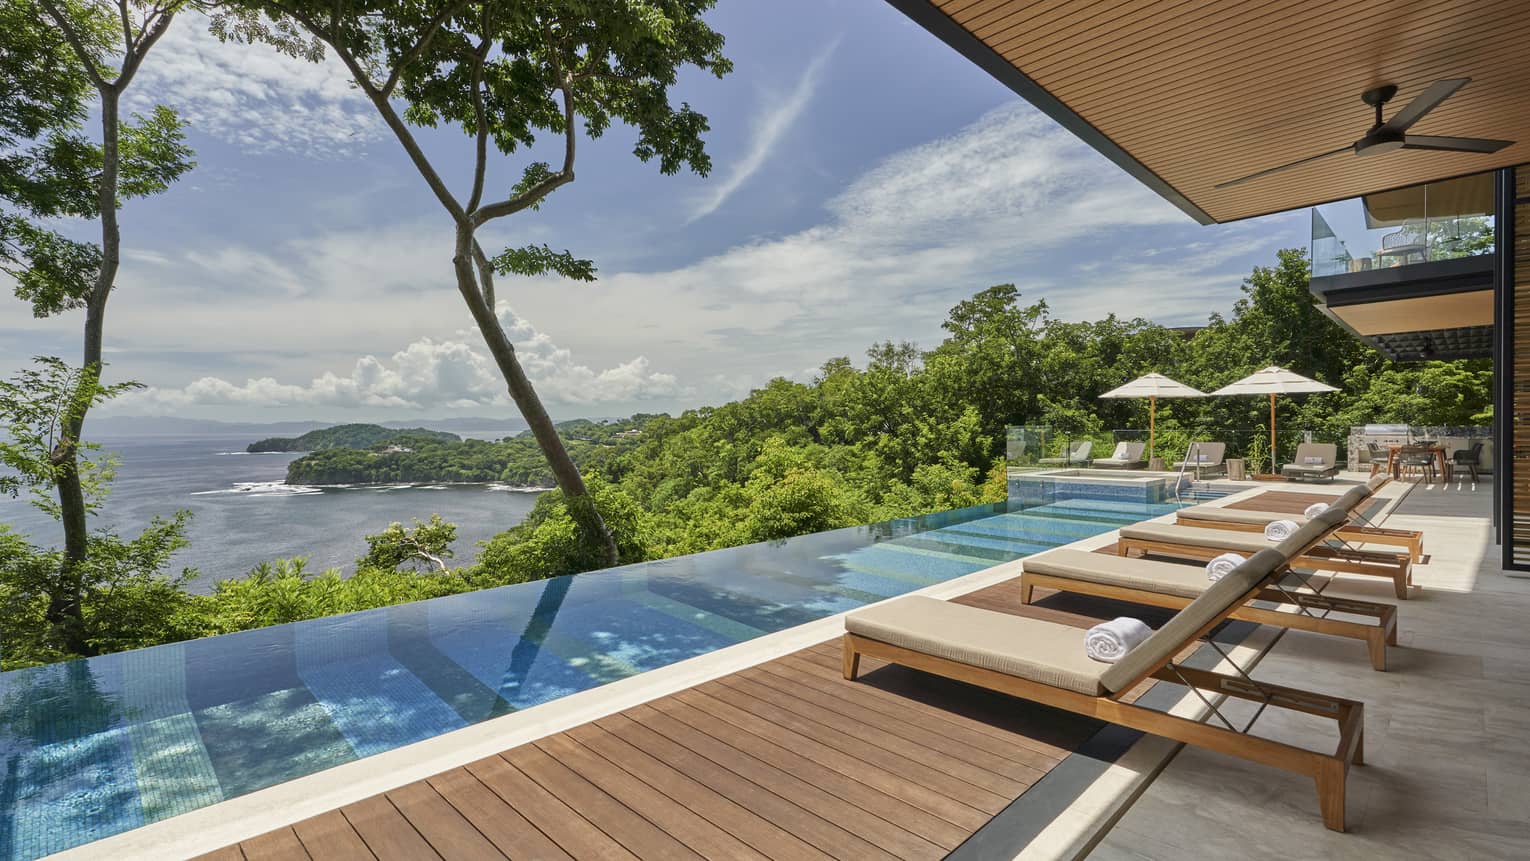 Narrow rectangular pool and wooden pool deck with cushioned lounge chairs, overlooking the sea